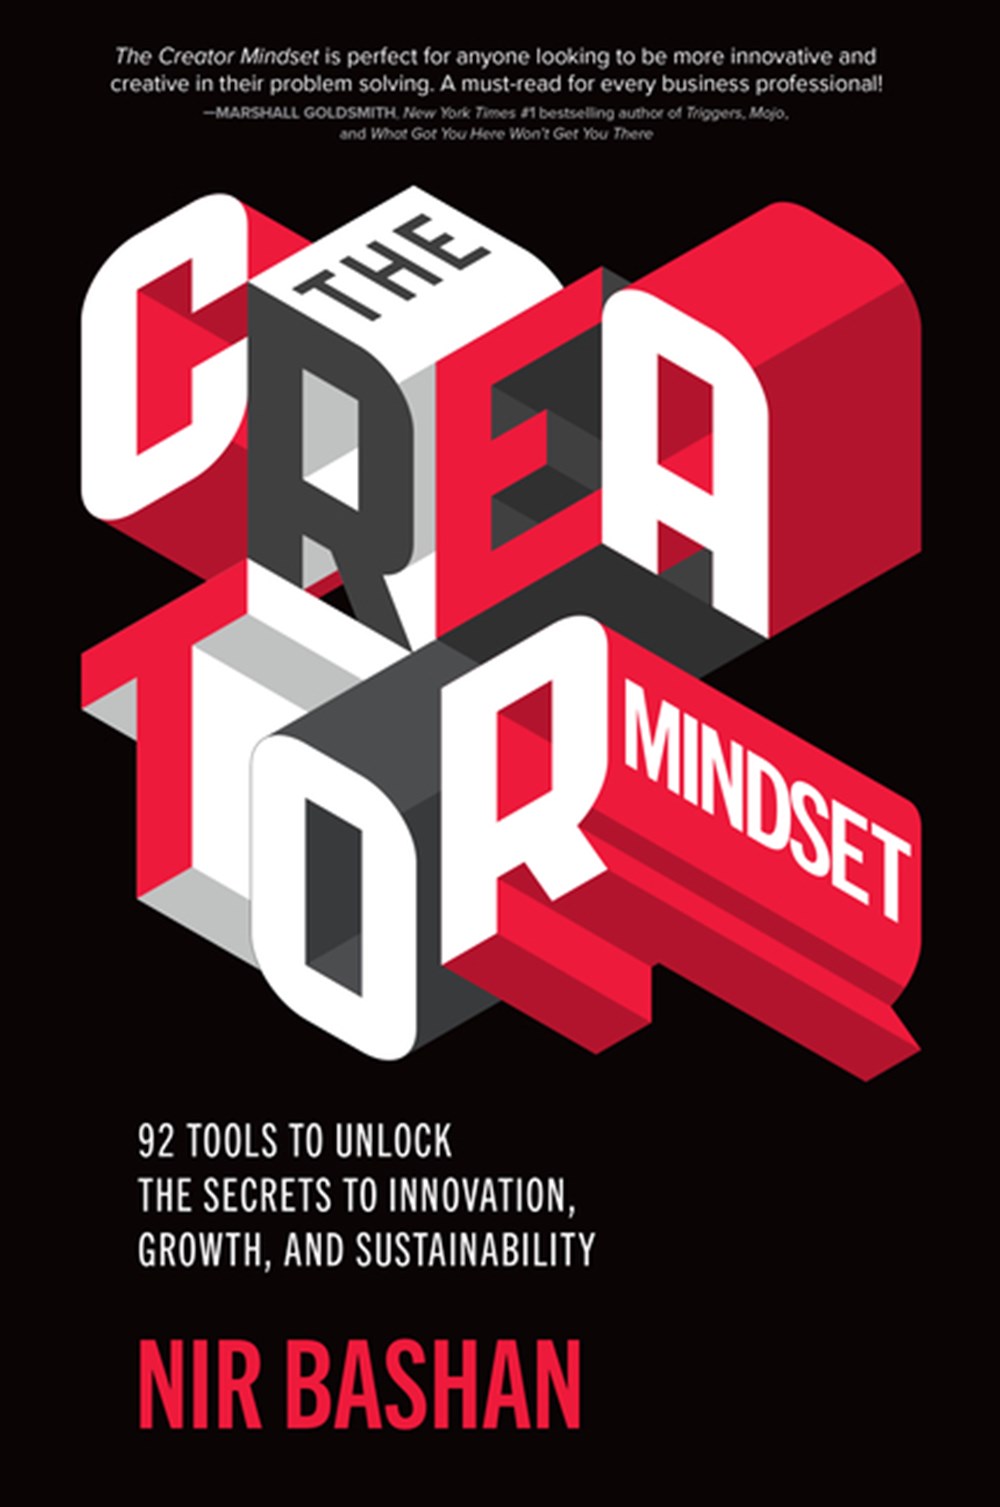 Creator Mindset 92 Tools to Unlock the Secrets to Innovation, Growth, and Sustainability